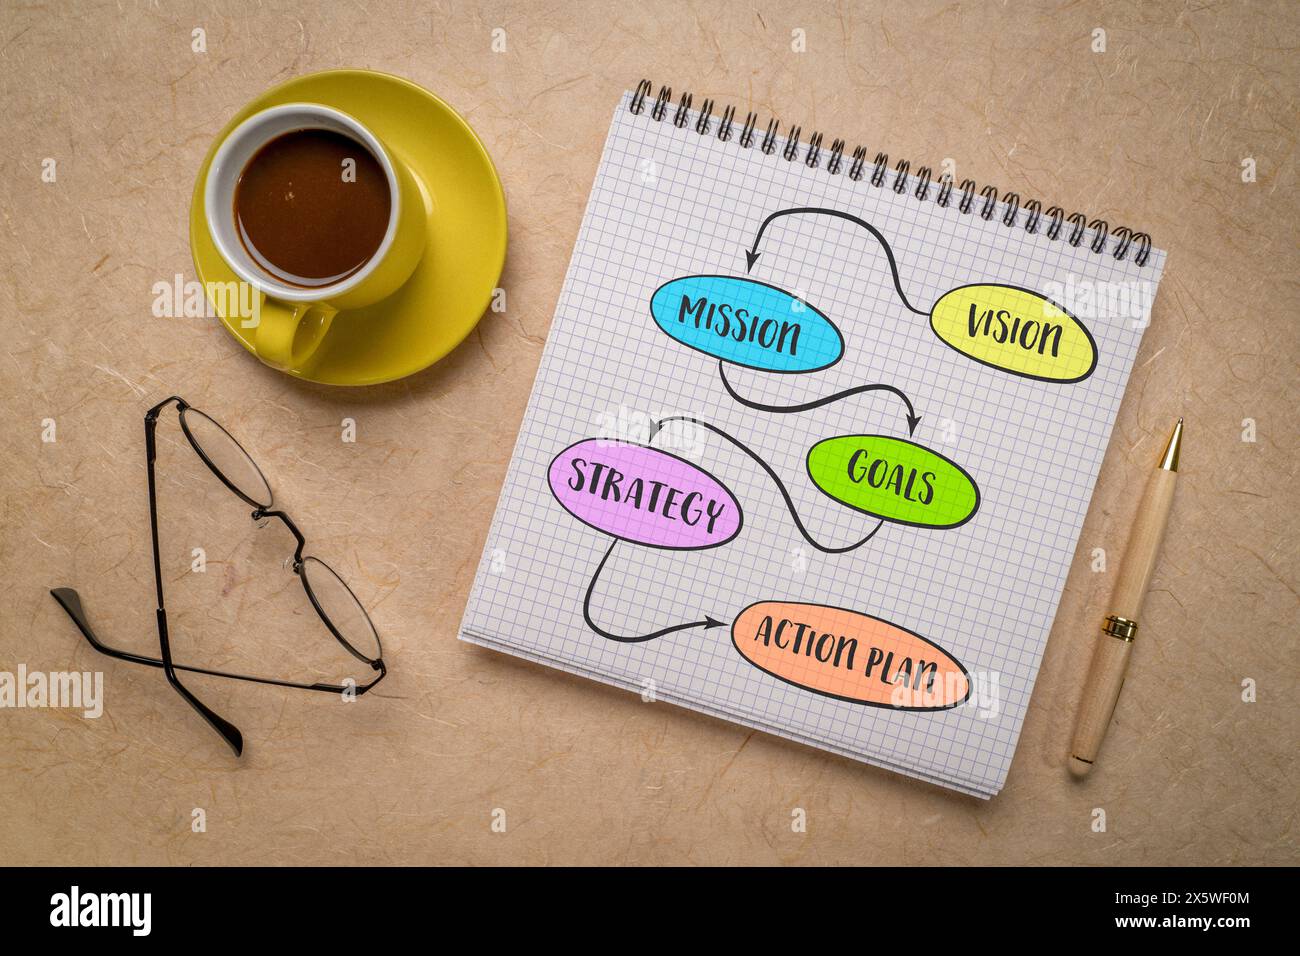 vision, mission, goals, strategy and action plan - diagram sketch in a notebook, business concept Stock Photo